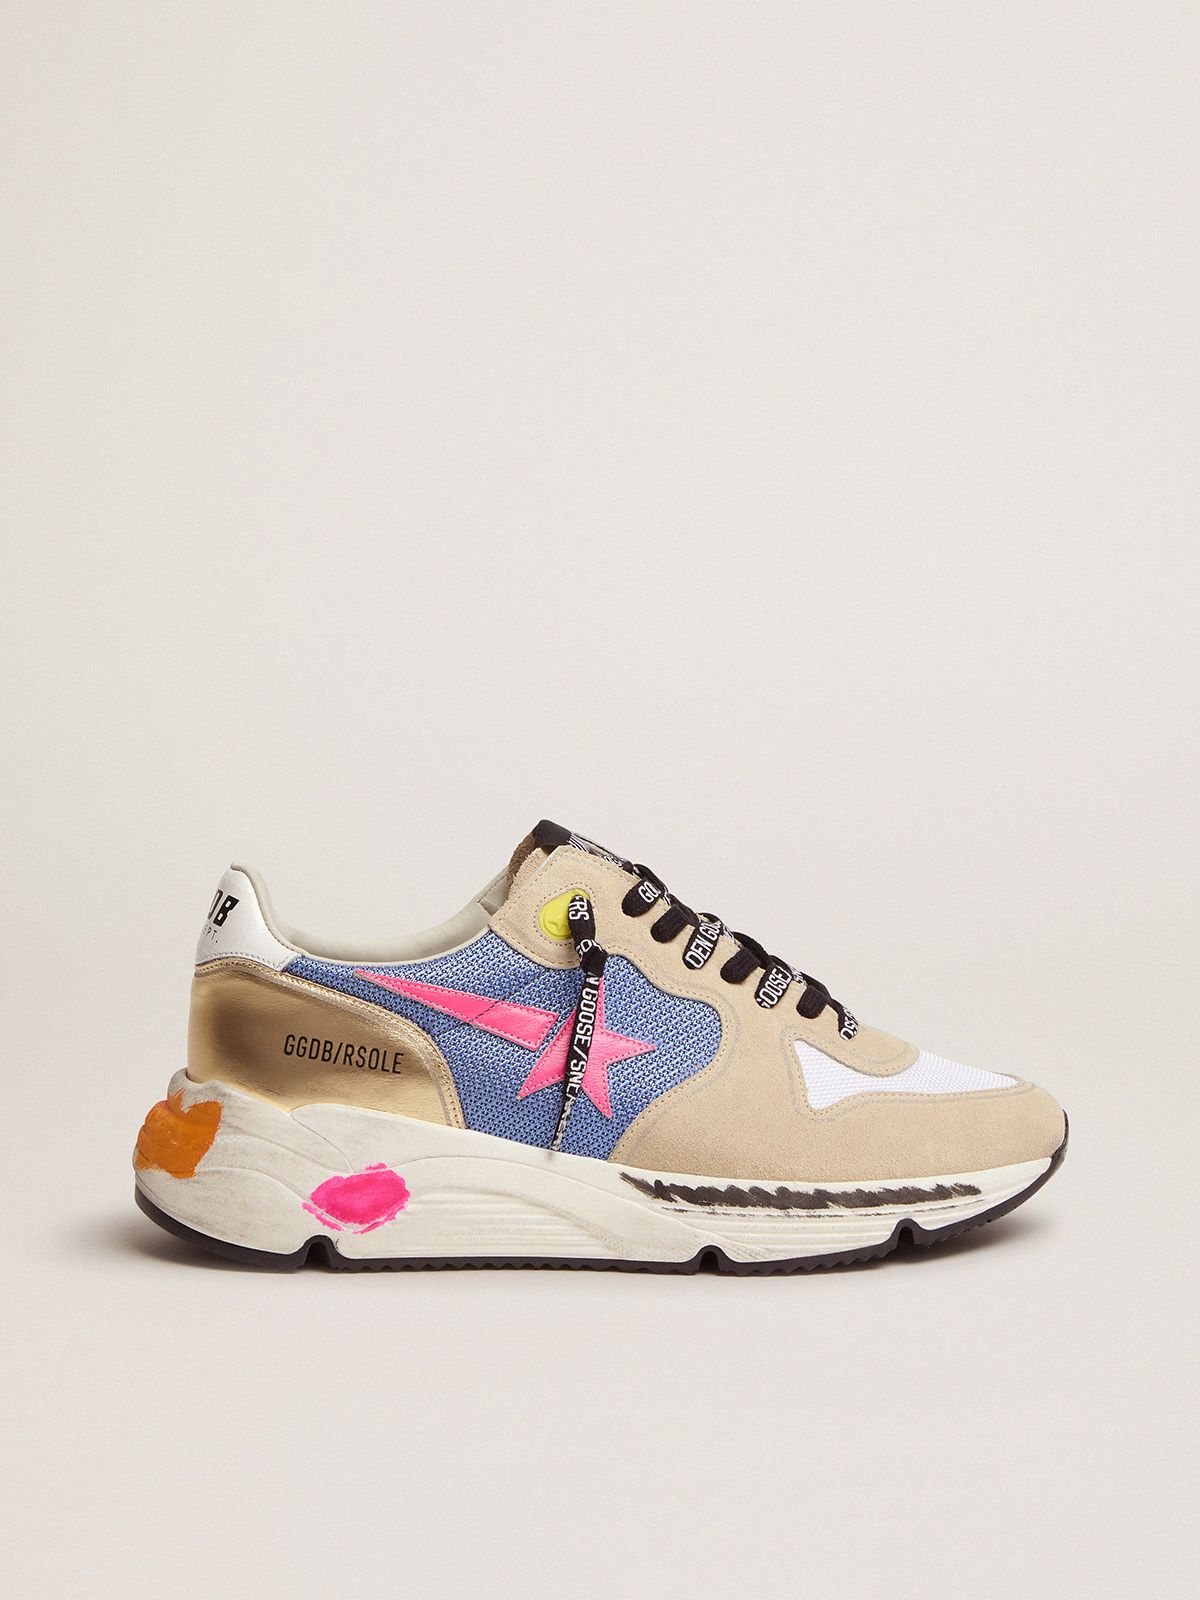 golden goose in detail sneakers gold Running suede with Sole